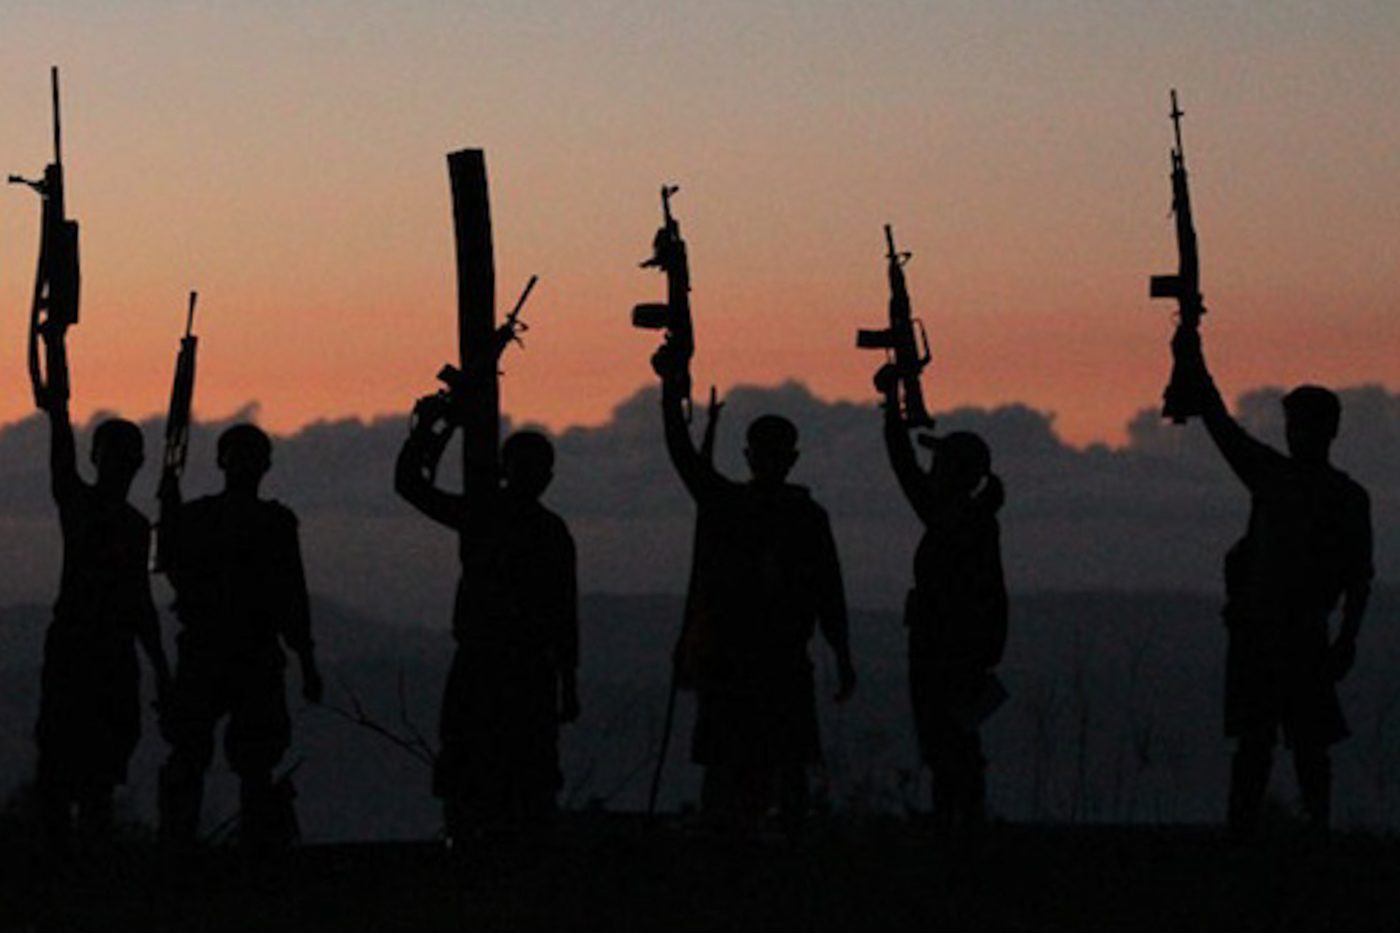 AFP clashes with NPA in Davao on Christmas Day